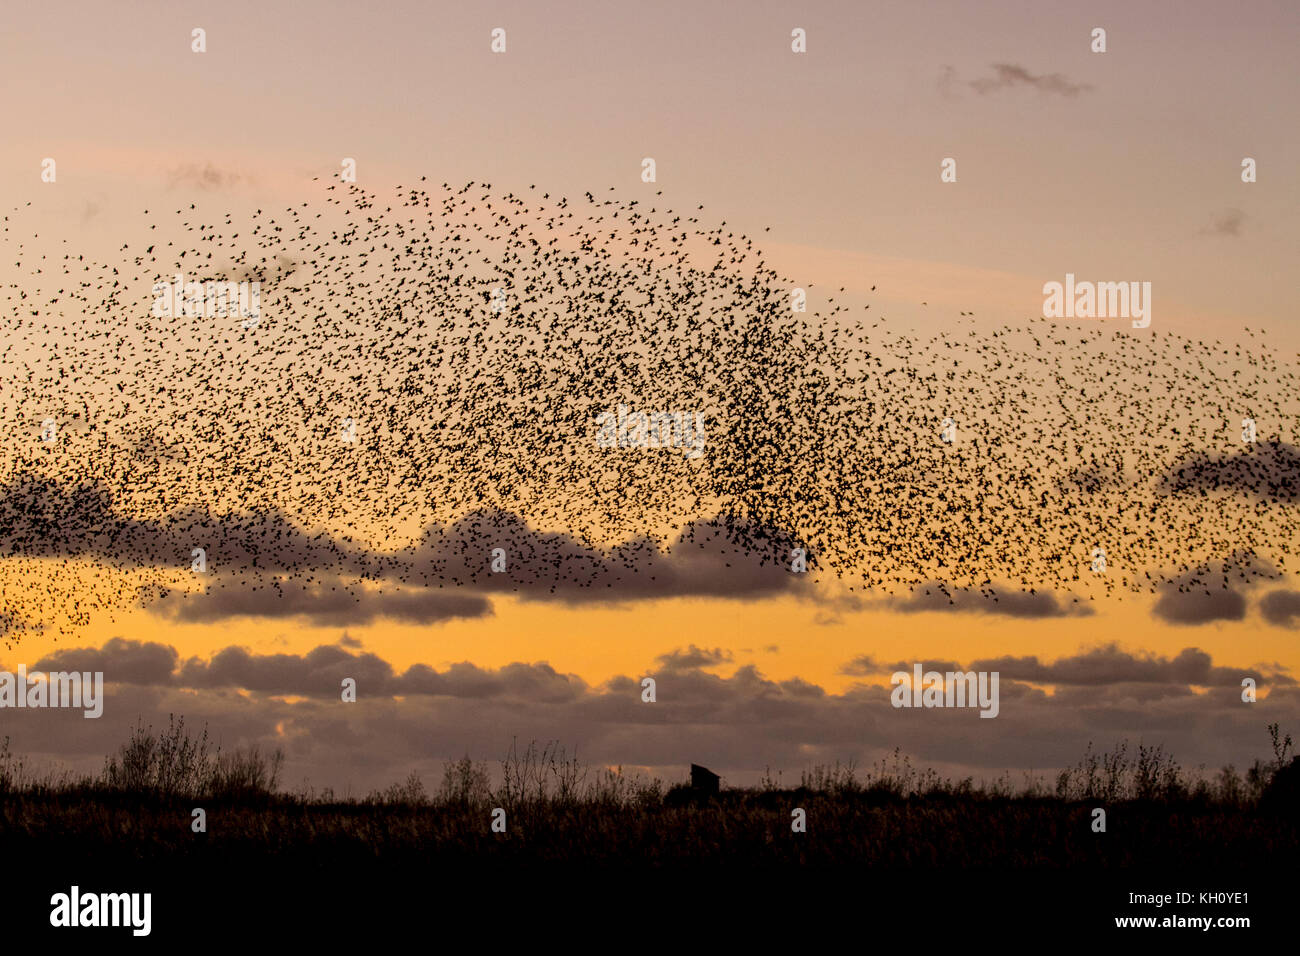 Burscough, Merseyside, UK Weather 12th November, 2017. Spectacular Starling flocks mumurate over Martin Mere nature reserve at sunset as an estimated 50 thousand starlings gather at the onset of a cold winter, and early nights triggers this autumn gathering and groupings. The murmur or chatter, the interaction between the huge numbers as they fly, is quite intense and is thought to form part of a communication of sorts. These huge flocks are the largest seen in the last for 12 years and are attracting large numbers of birdwatchers to the area. Credit. MediaWorldImages/AlamyLiveNews Stock Photo